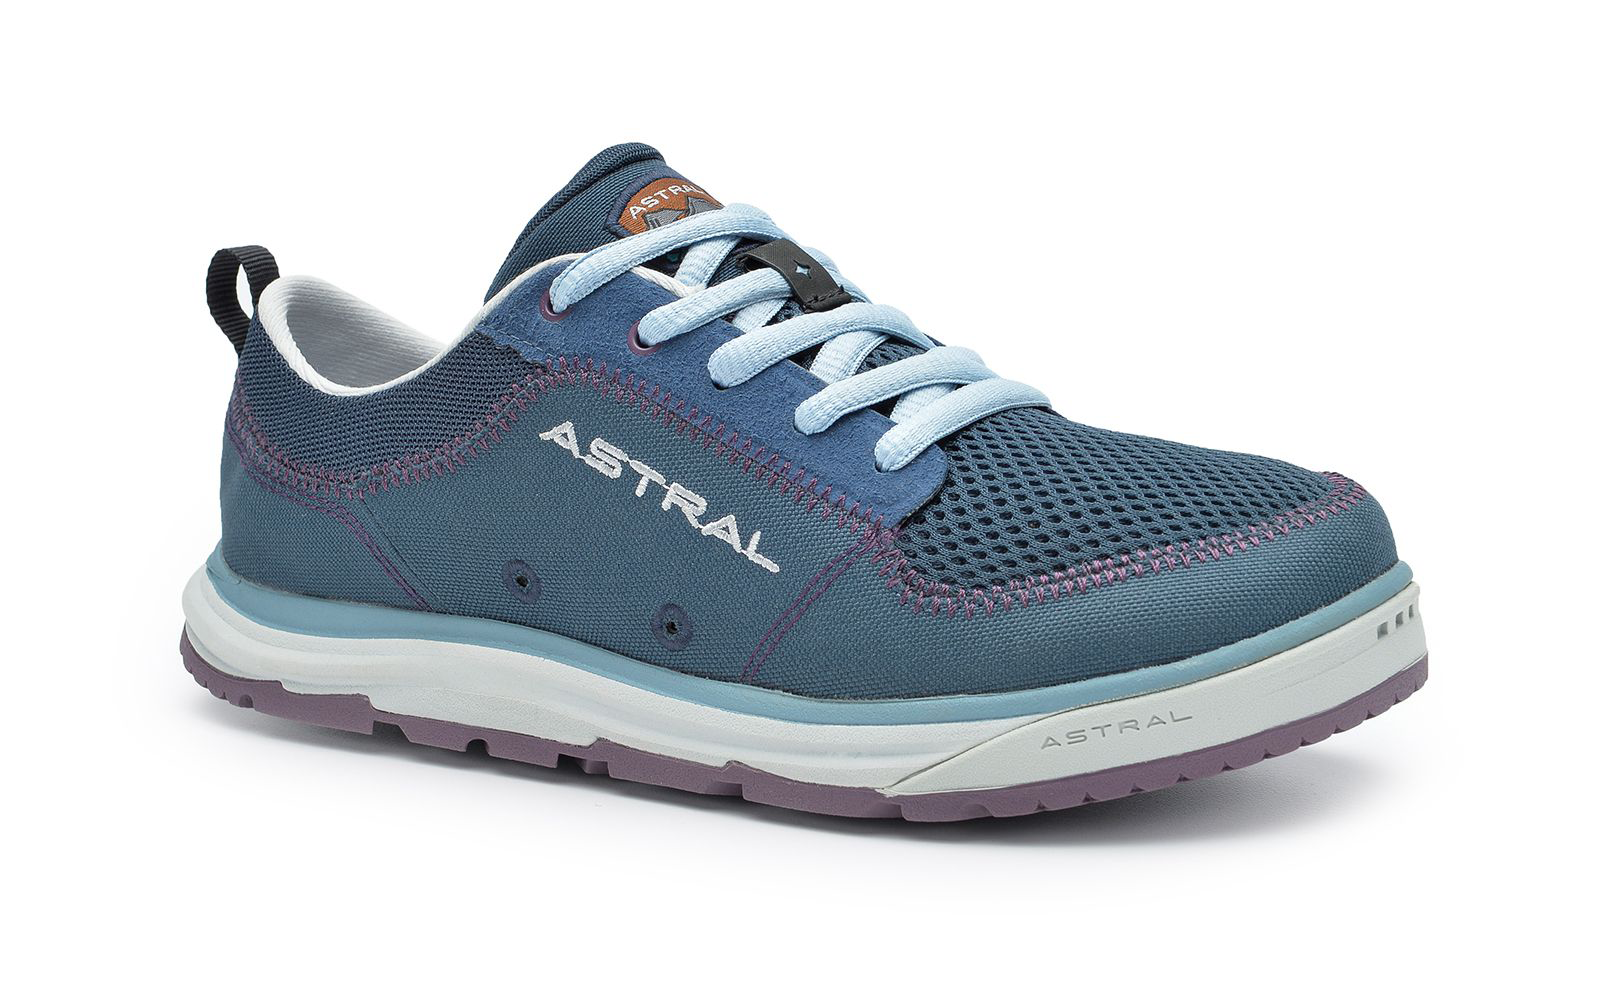 Astral Brewess 2.0 Lace-Up Water Shoes for Ladies